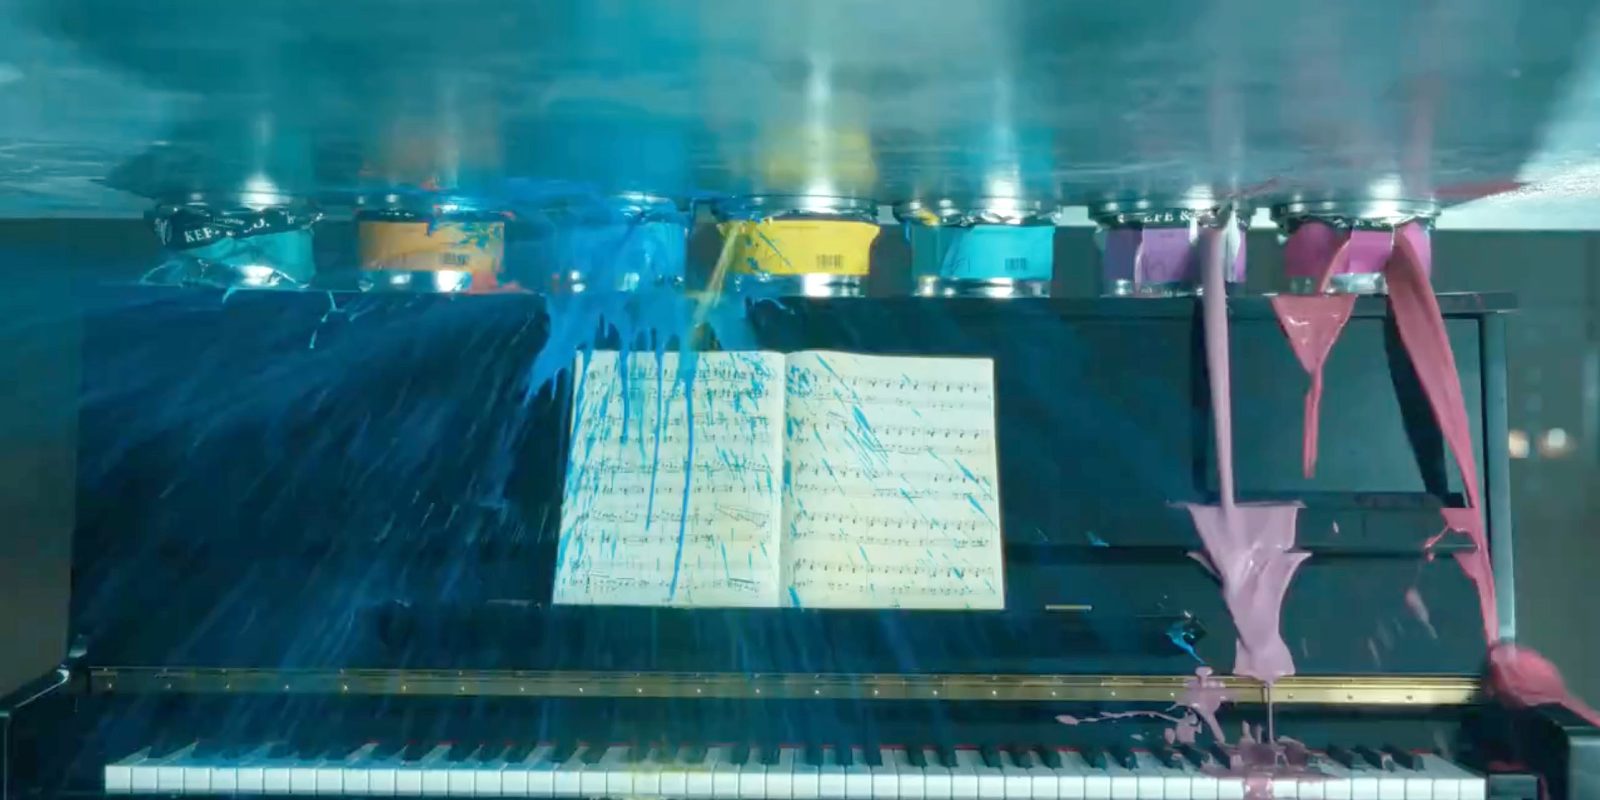 Still frame from iPad Pro ad, showing paints being crushed and ruining a piano